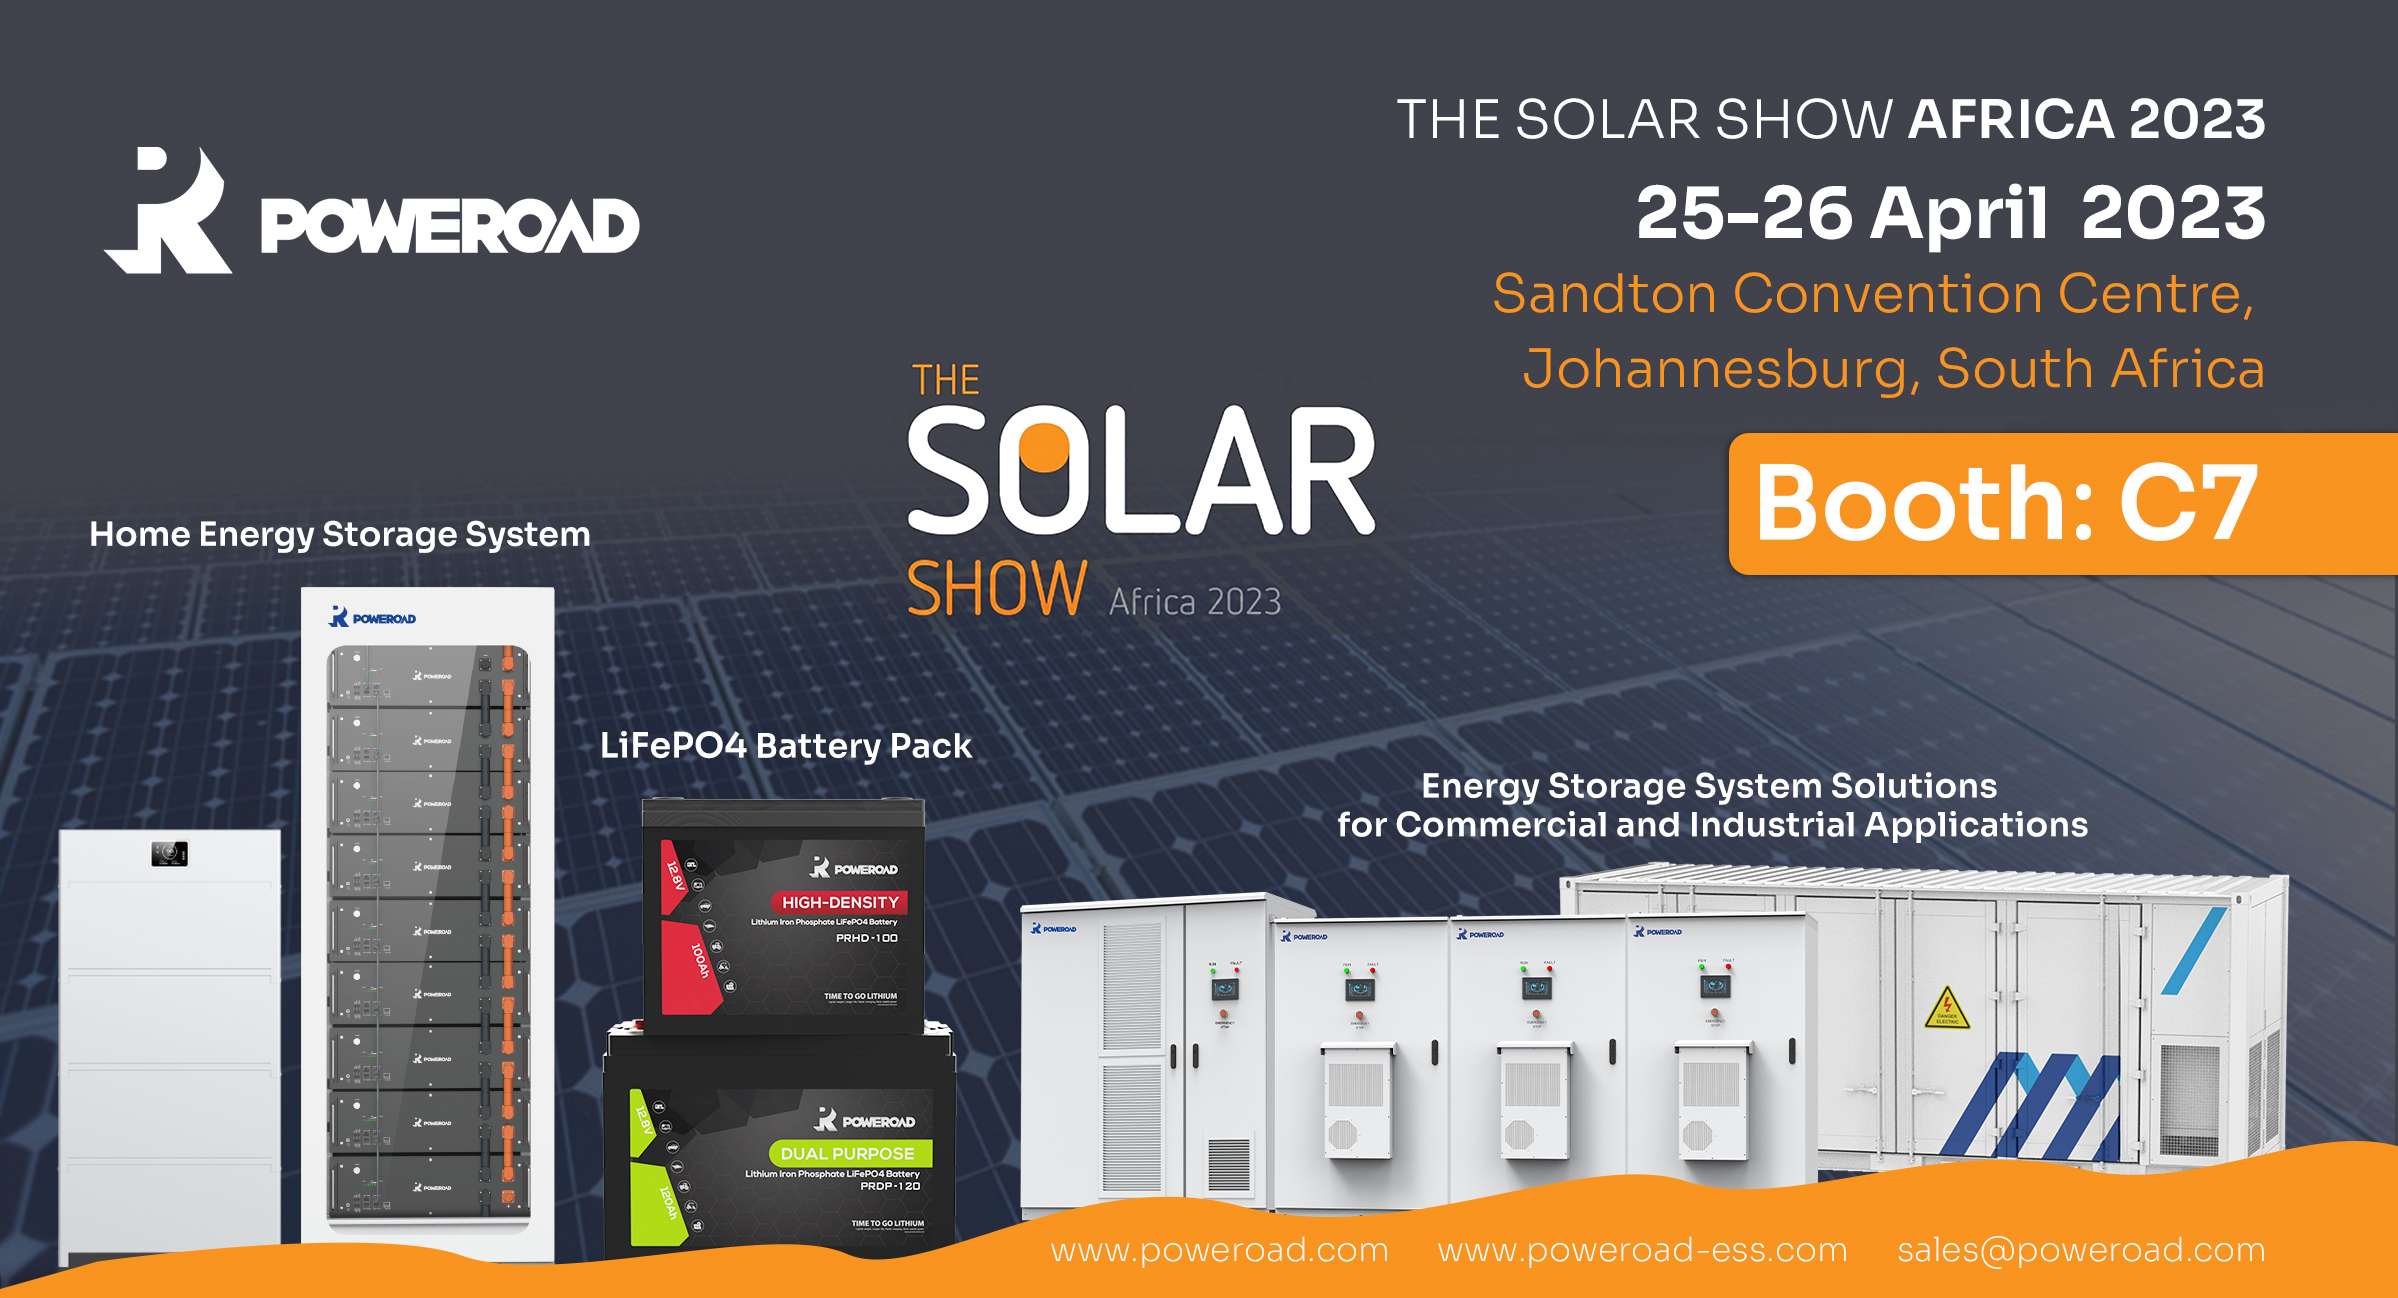 We will be exhibiting at The Solar Show Africa 2023